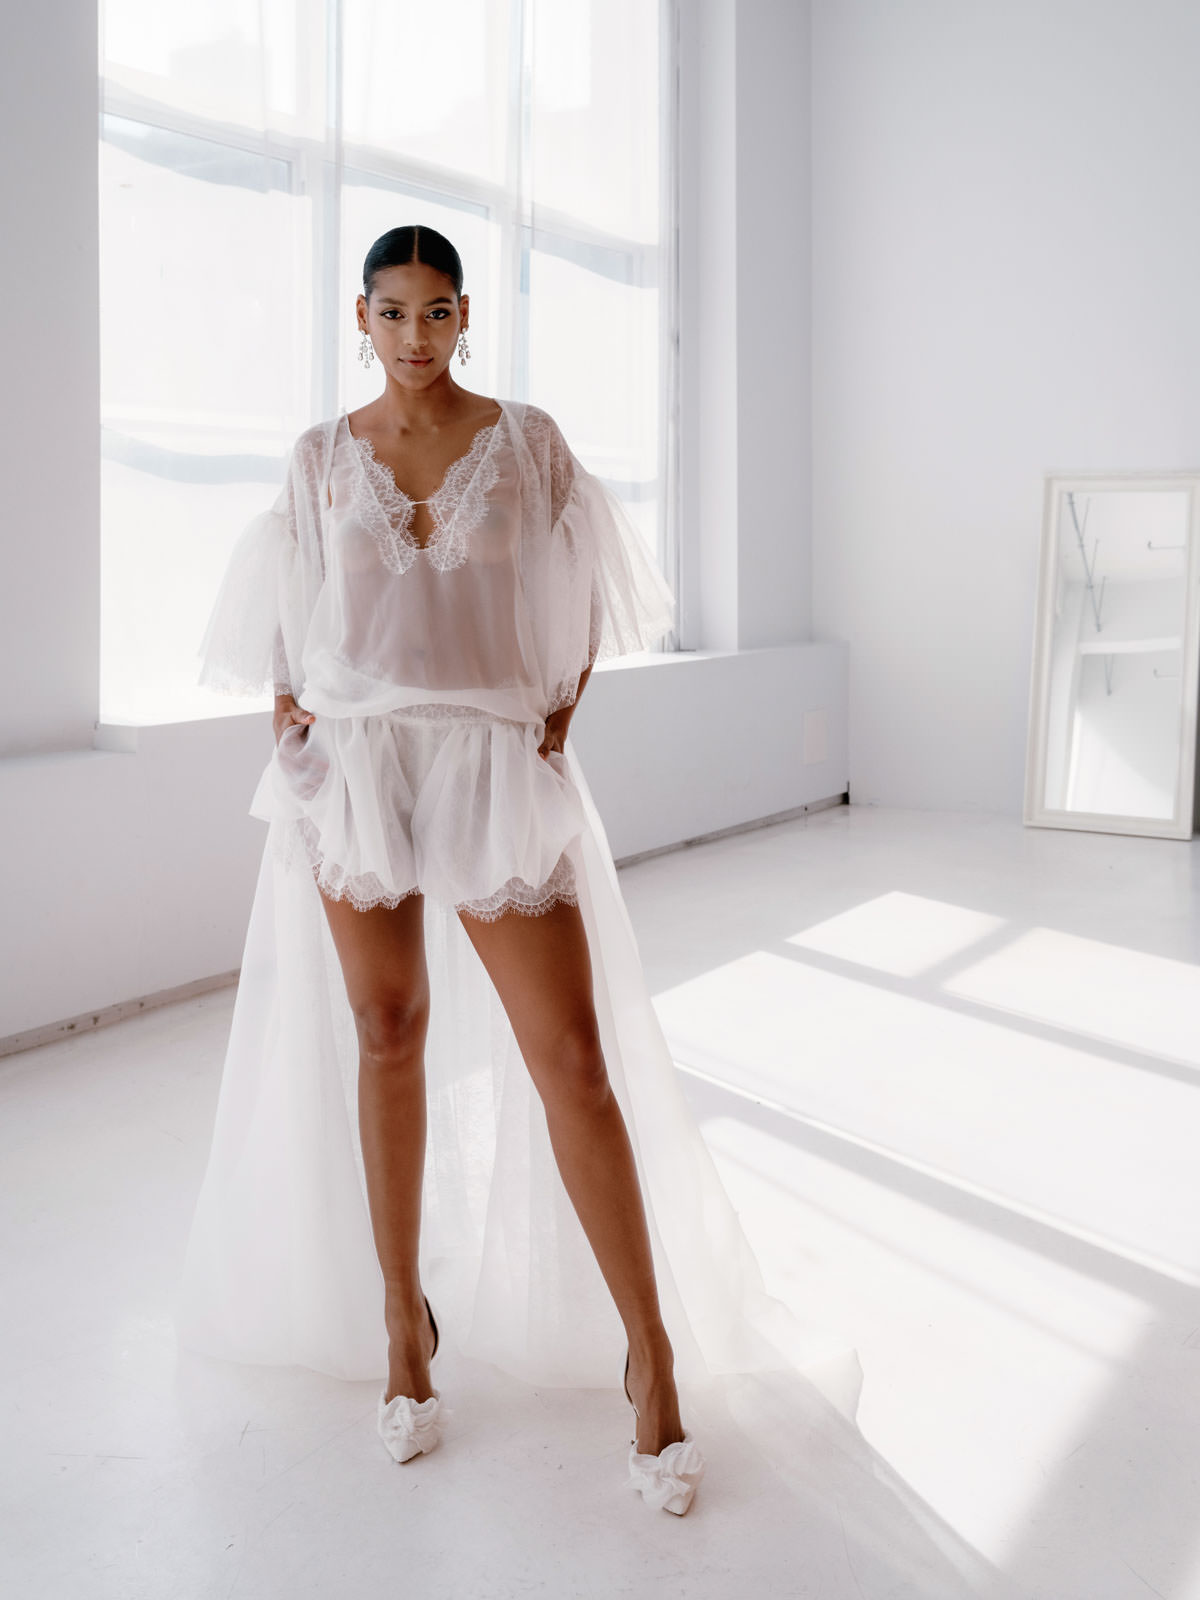 Editorial image of a model wearing a wedding dress at the  New York Bridal Fashion Week. Image by Jenny Fu Studio